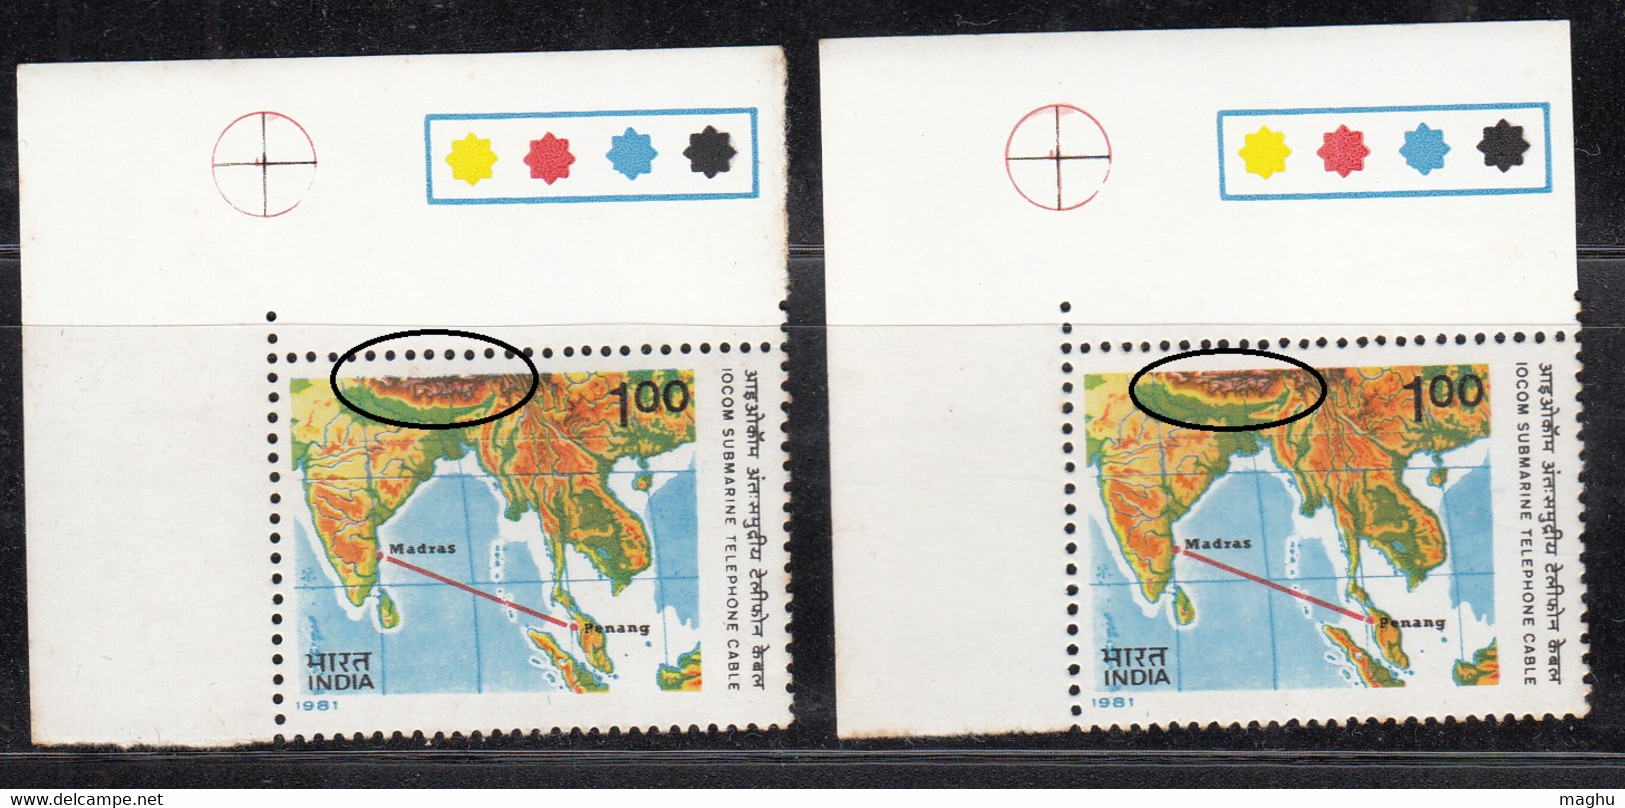 EFO, 2 Diff., Colour Variety T/L, India MNH 1981, IOCOM, Submarine Telephone Cable Map Cartography, Telecom Technology - Errors, Freaks & Oddities (EFO)